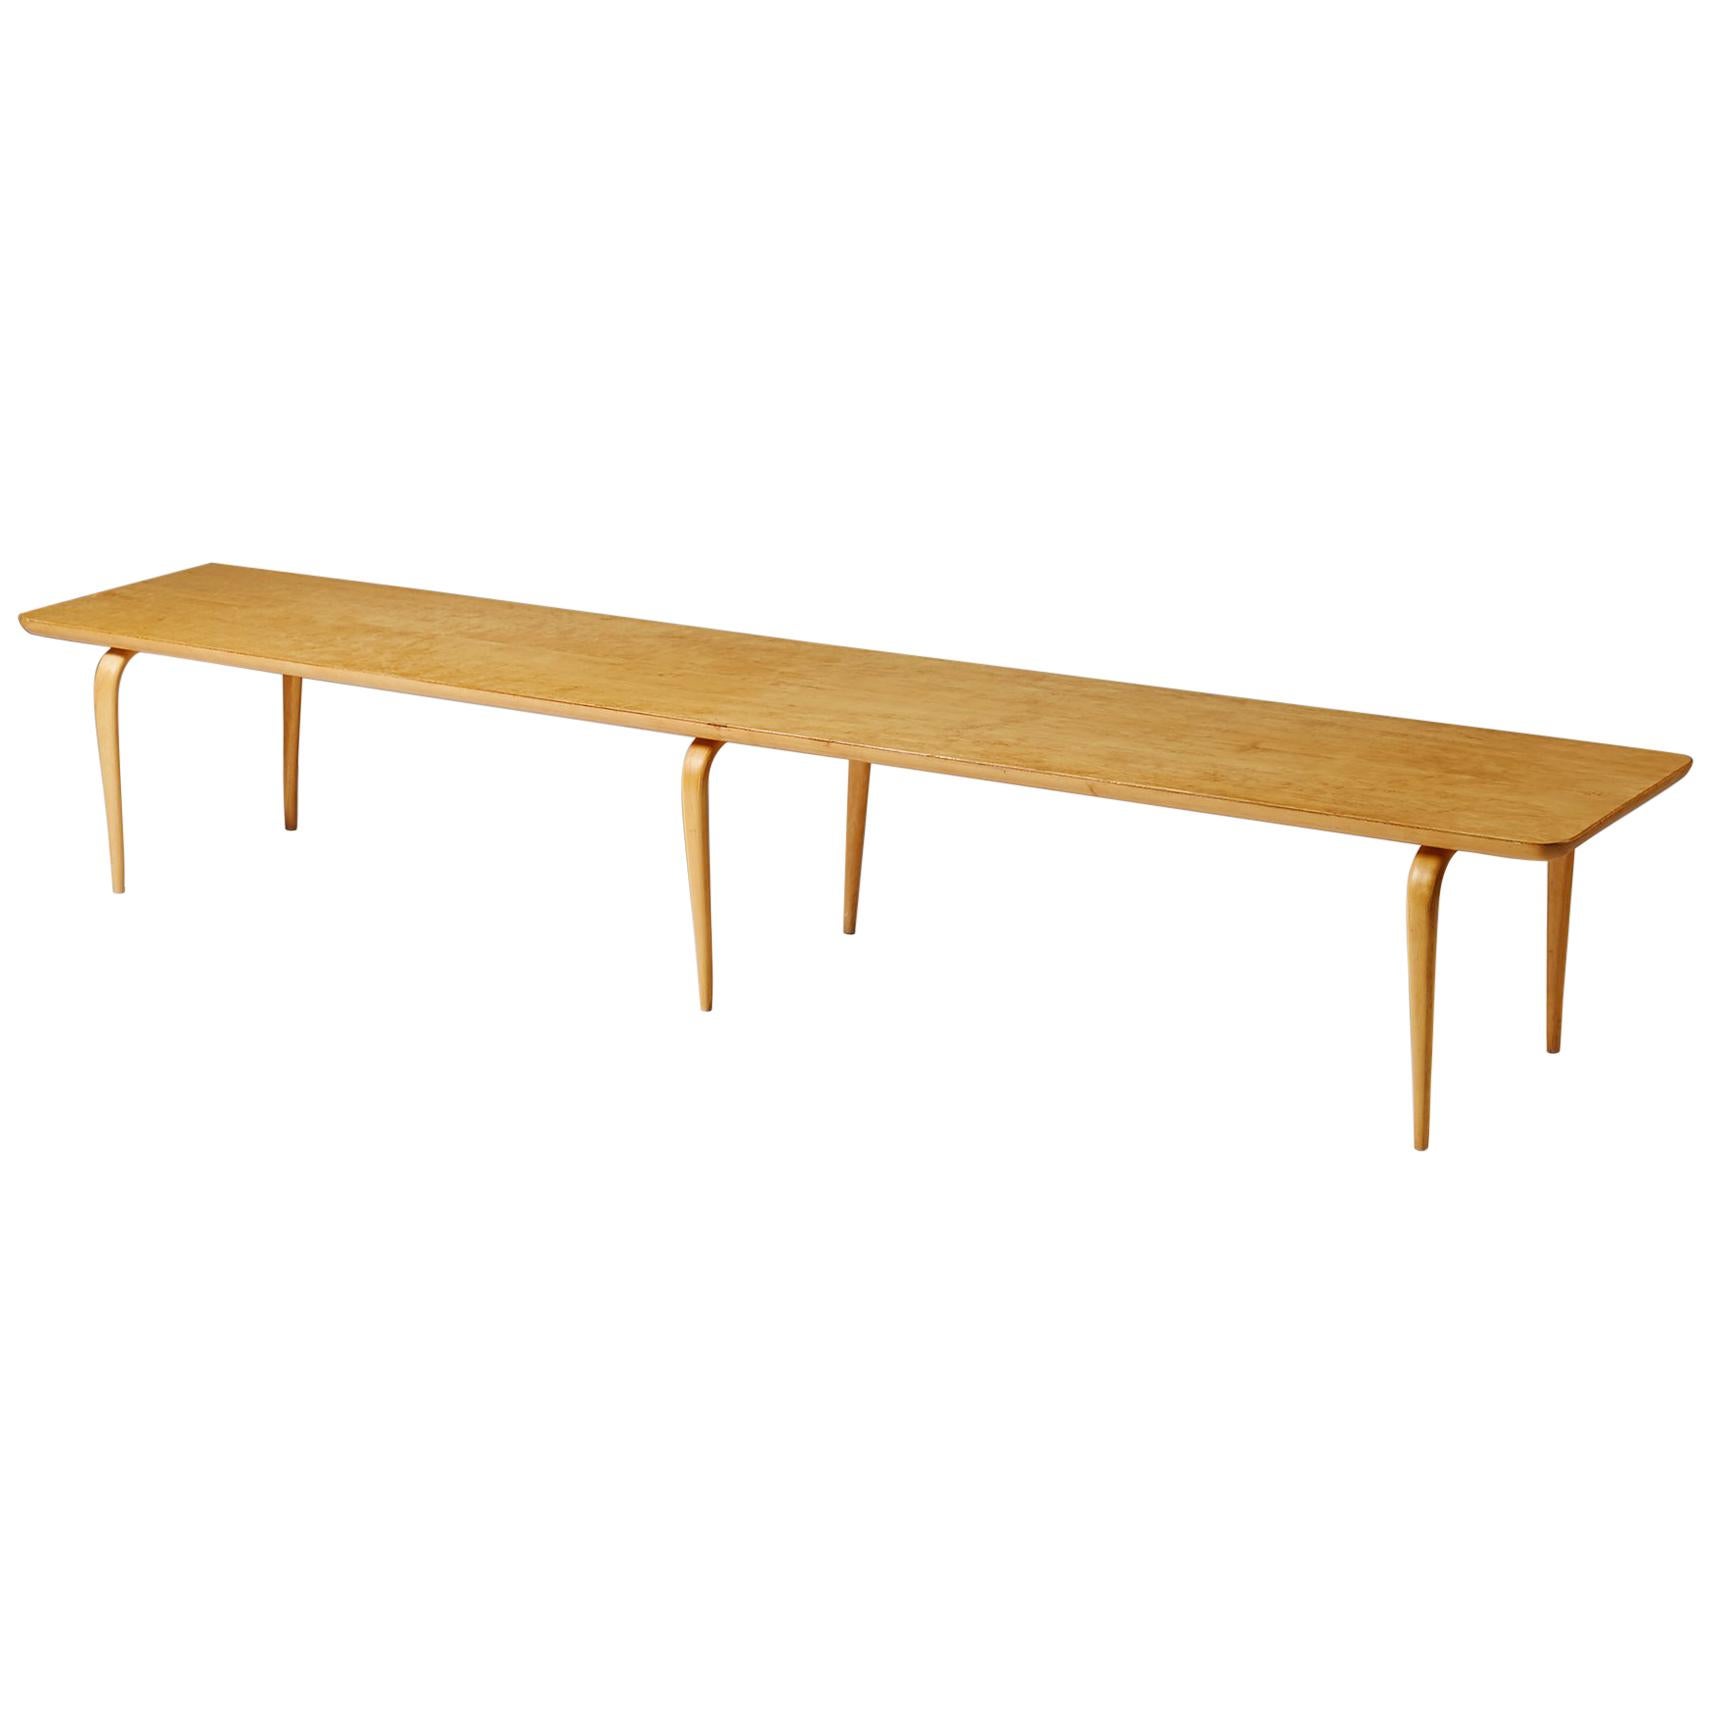 Bench or Coffee Table “Annika” Designed by Bruno Mathsson for Karl Mathsson